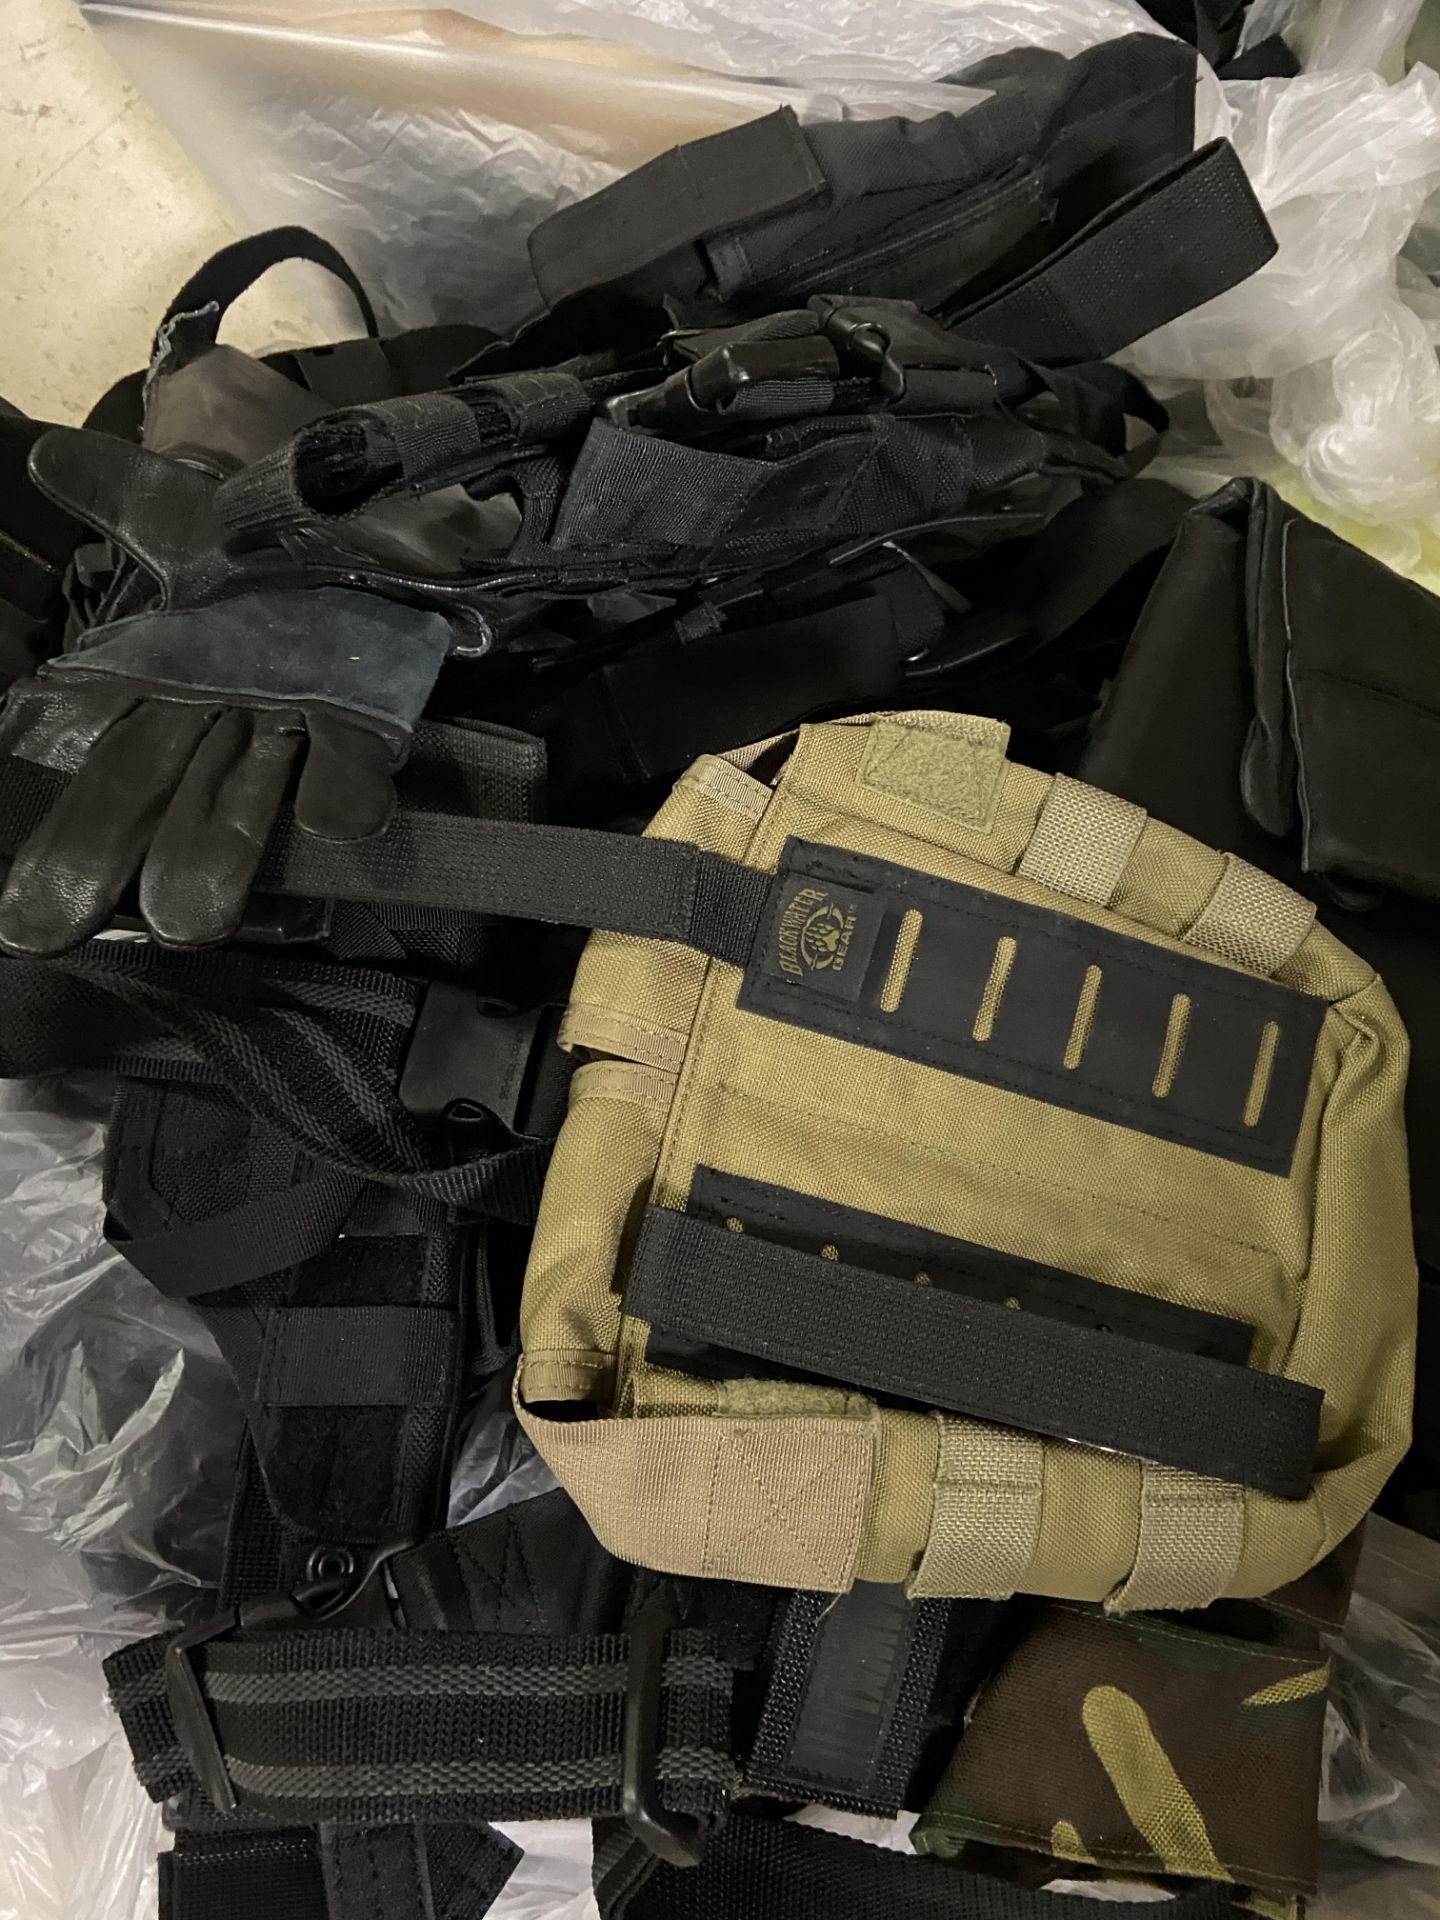 Blackwater Tactical Gear, and Misc other Items, Approx 100+, Misc Vest Gear, Utility Pouches, Etc - Image 3 of 6